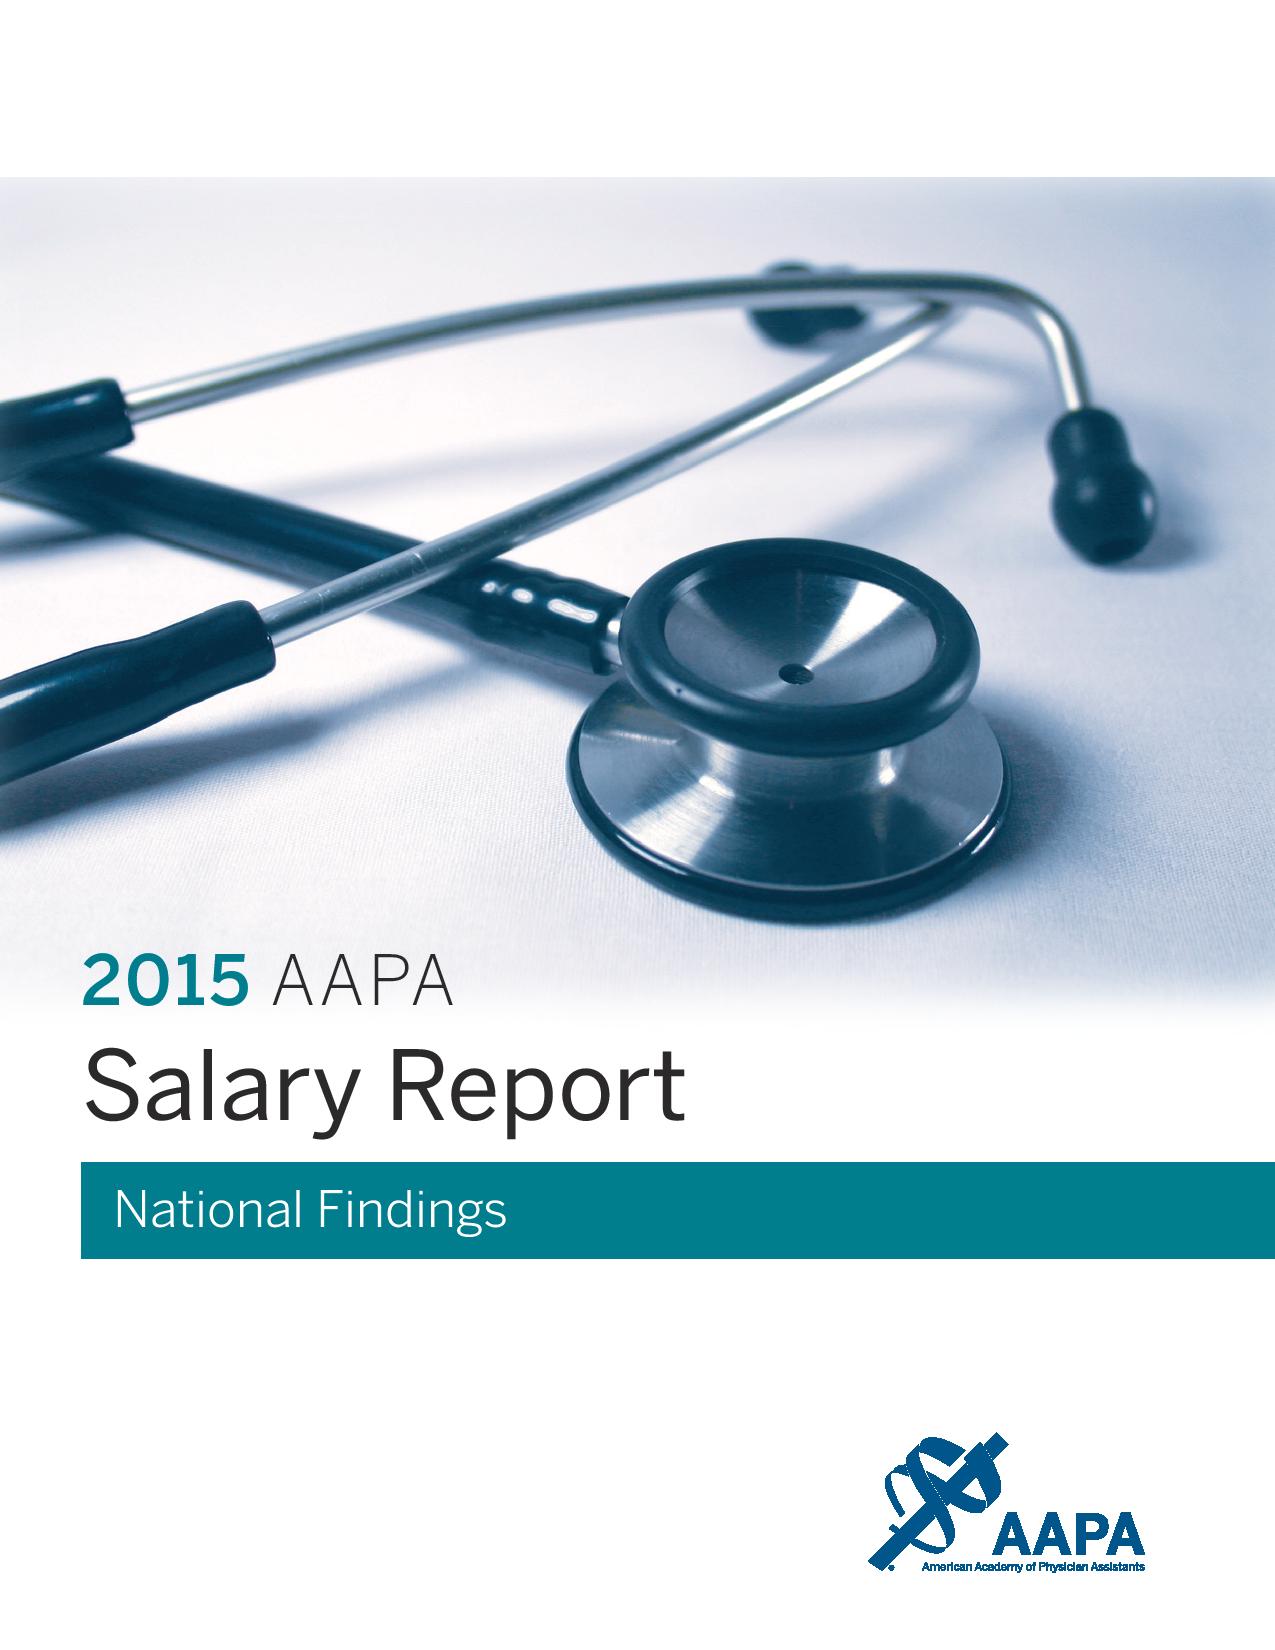 2015 AAPA Salary Report National Findings cover